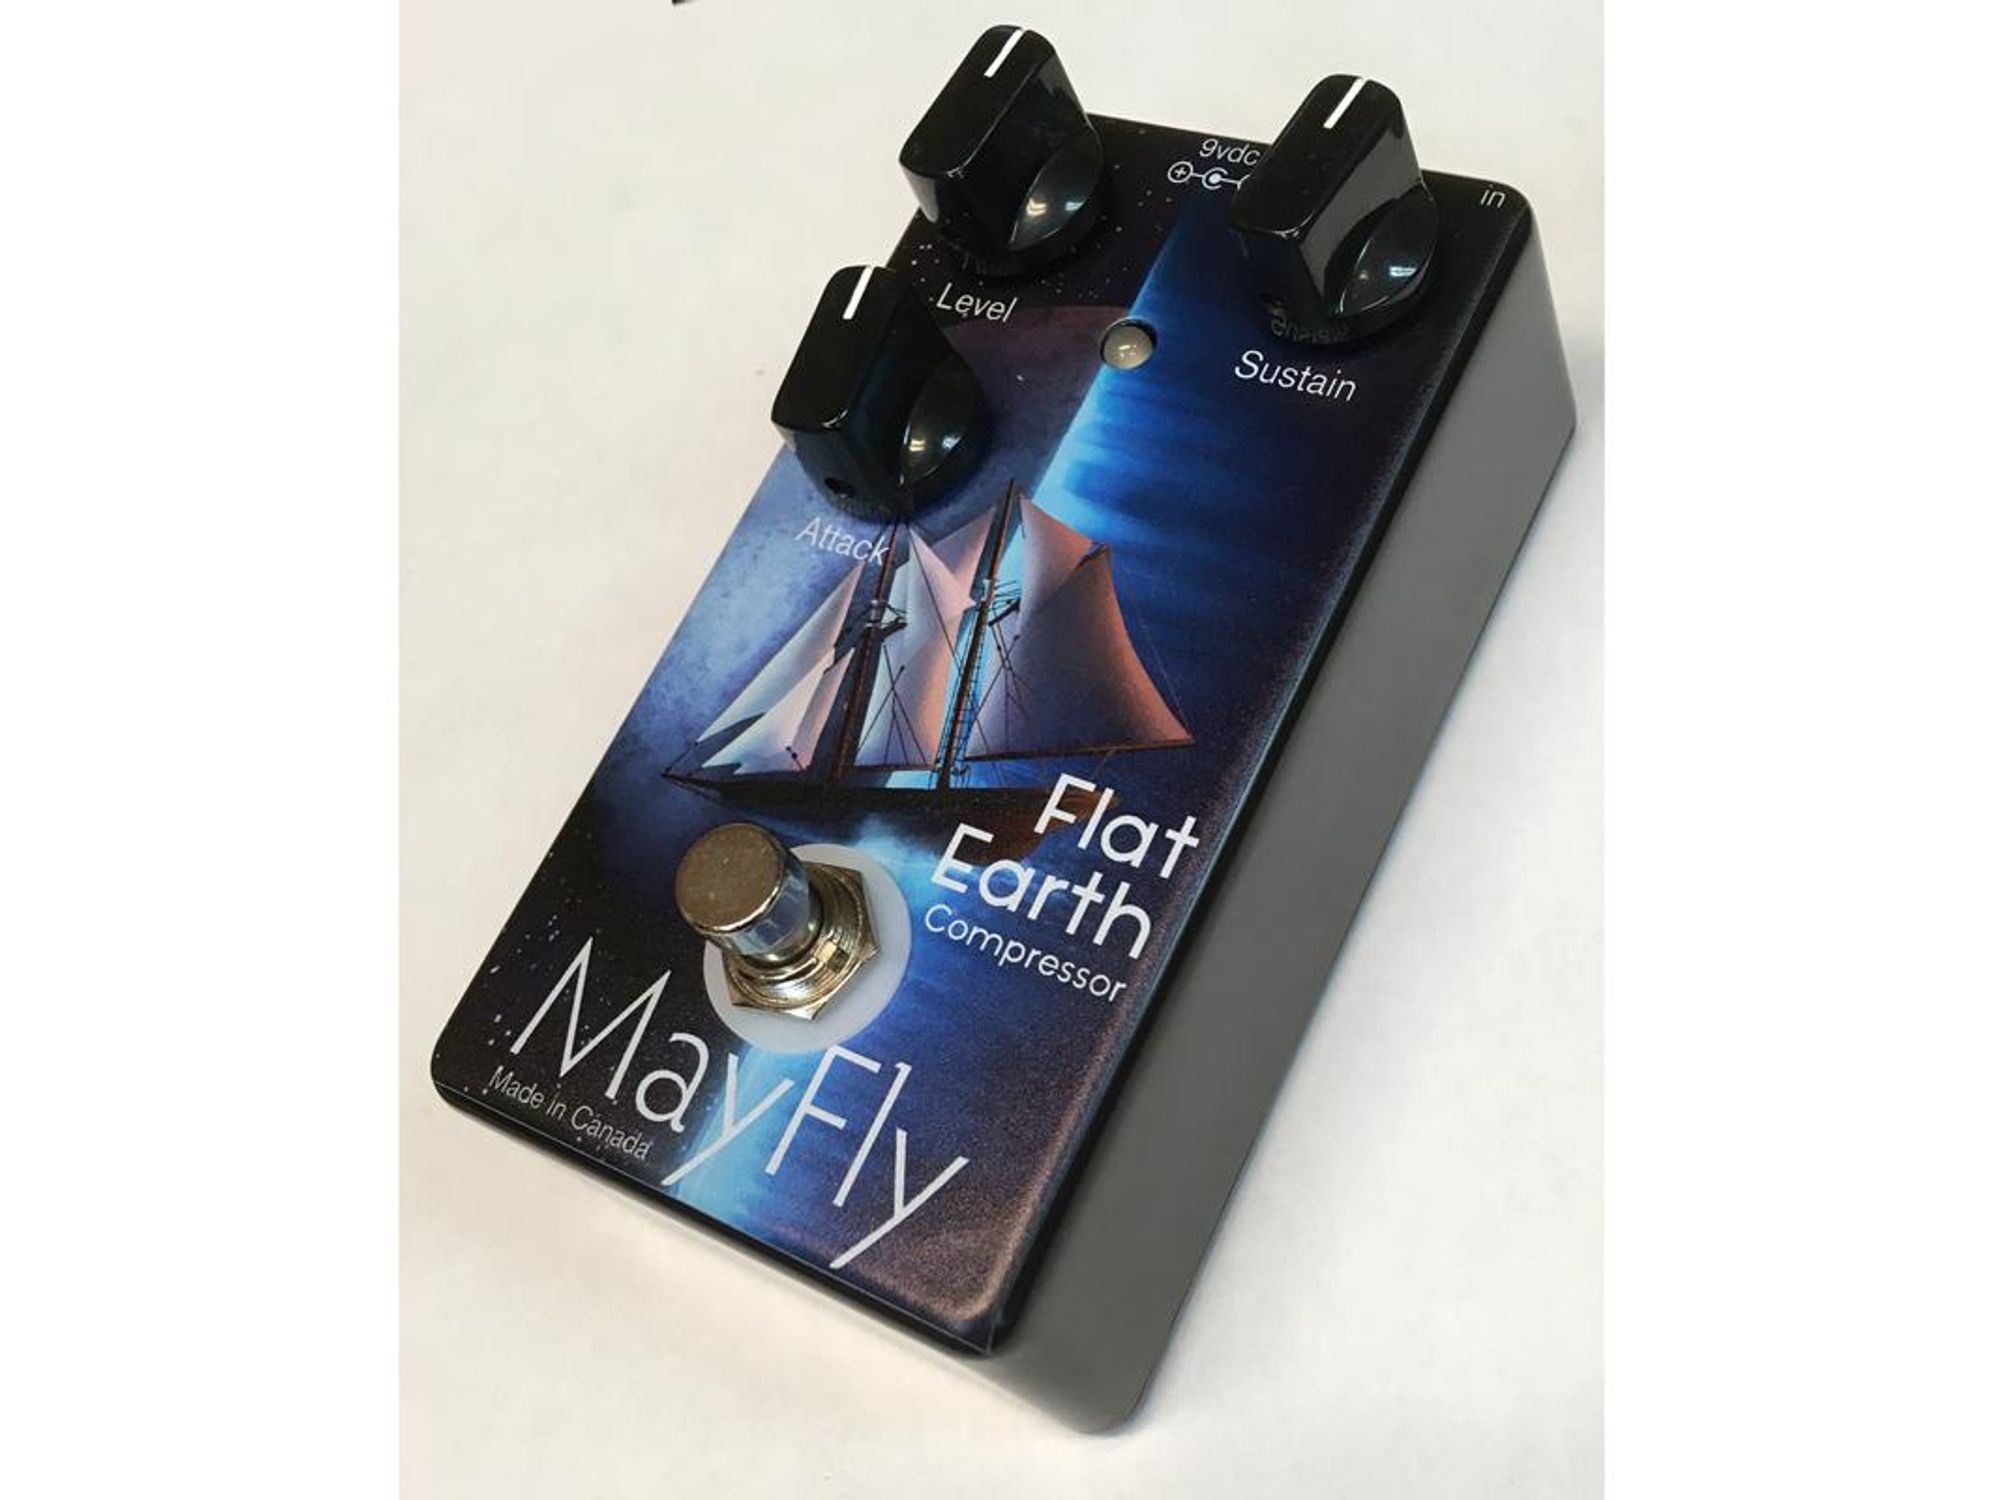 Mayfly Introduces the Flat Earth Compressor